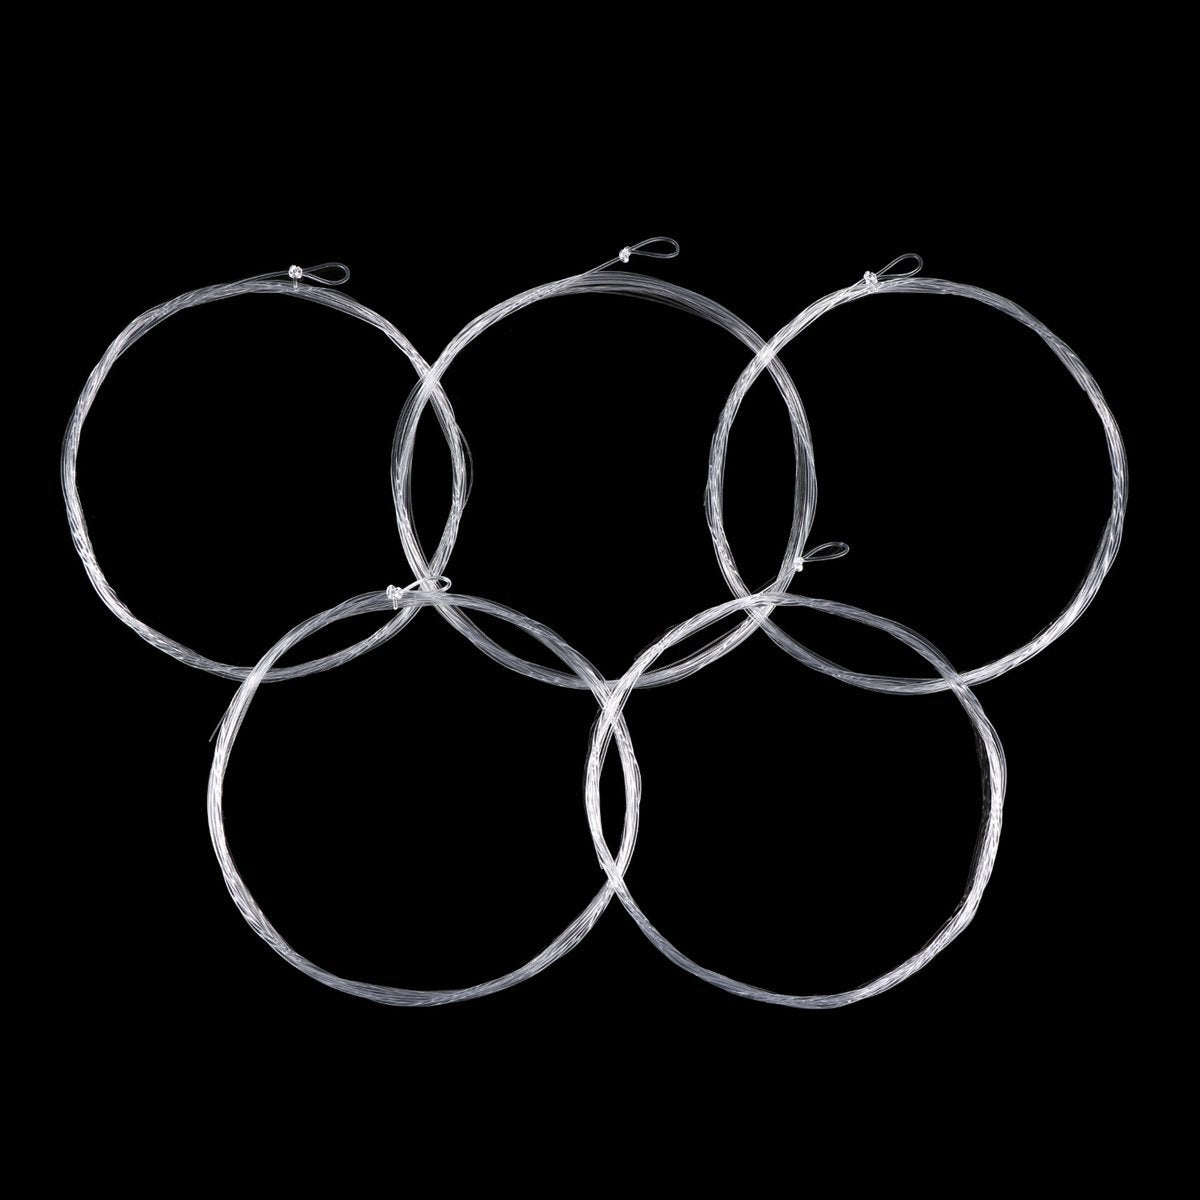 5-PC Clear Nylon Fly Fishing Tapered Leader with Loop - GOTURE